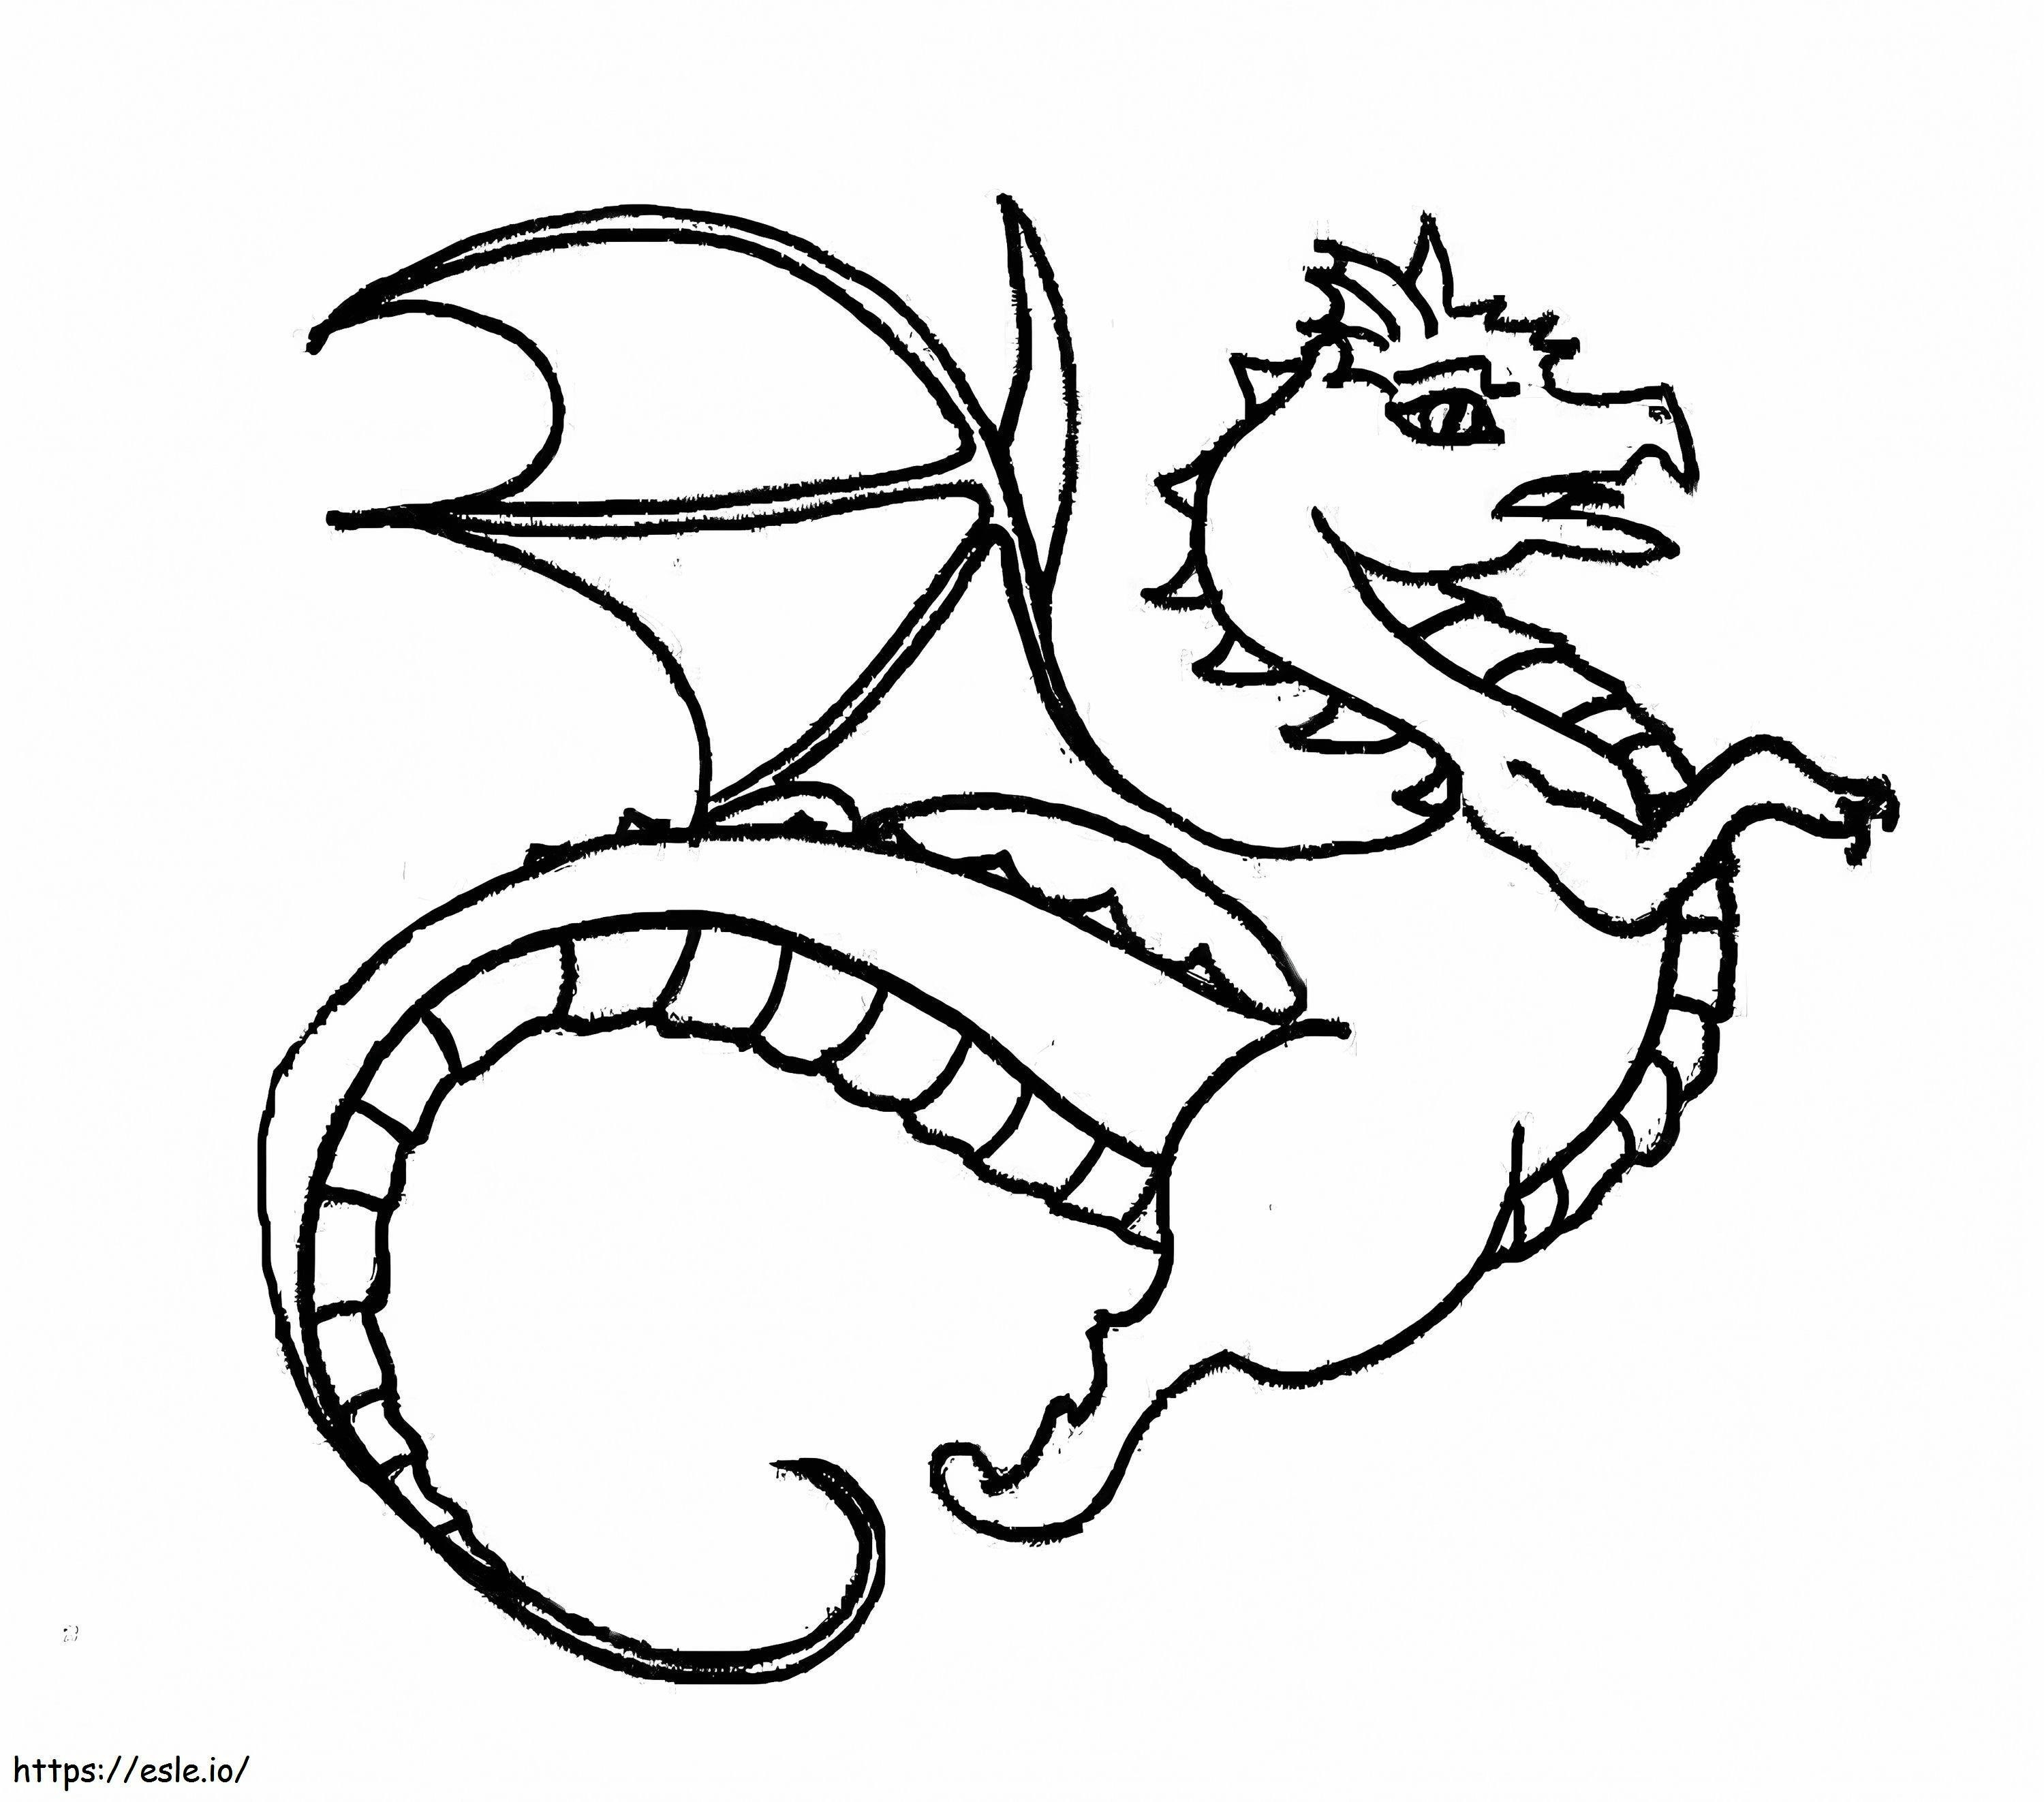 A Flying Dragon coloring page